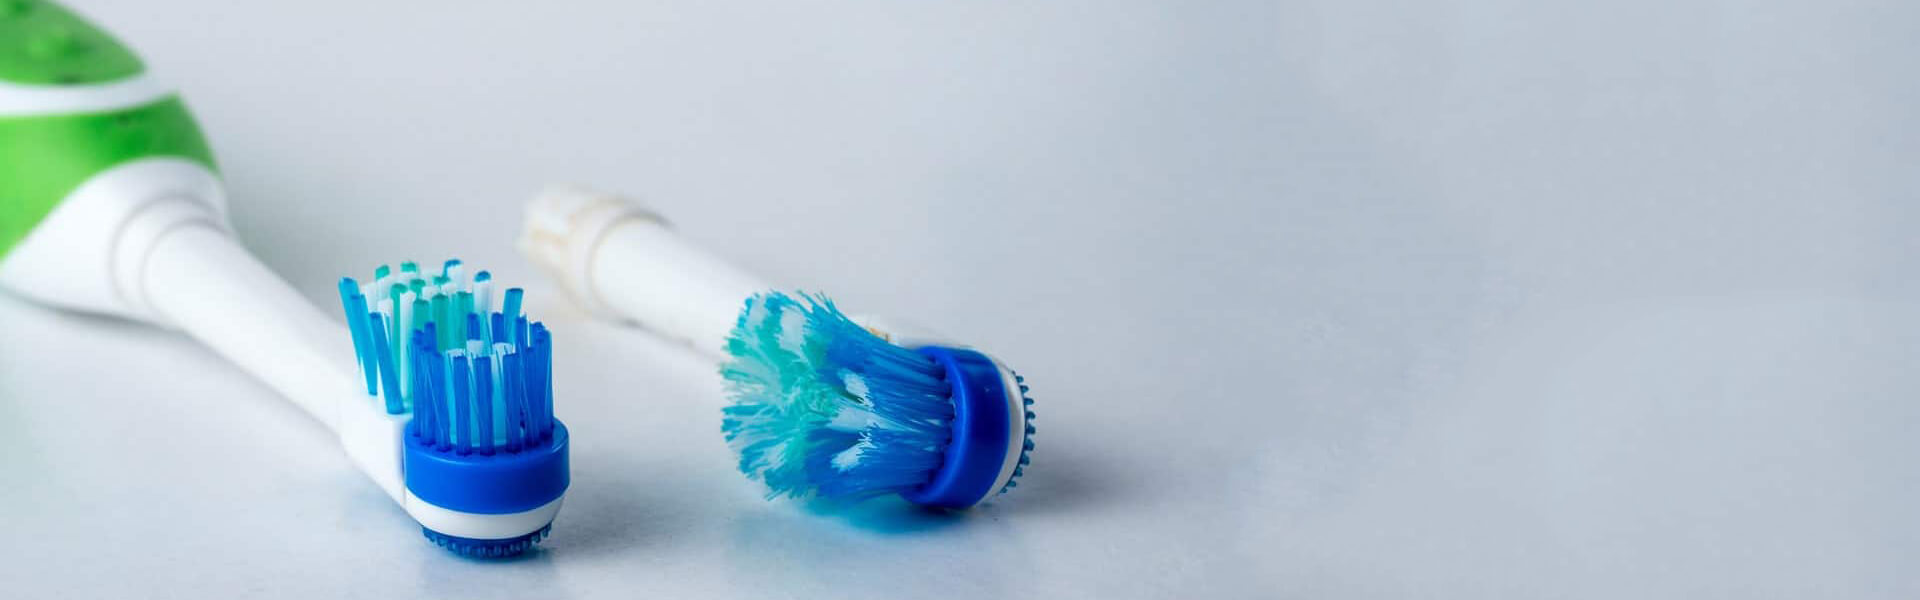 When should I Replace My Toothbrush?